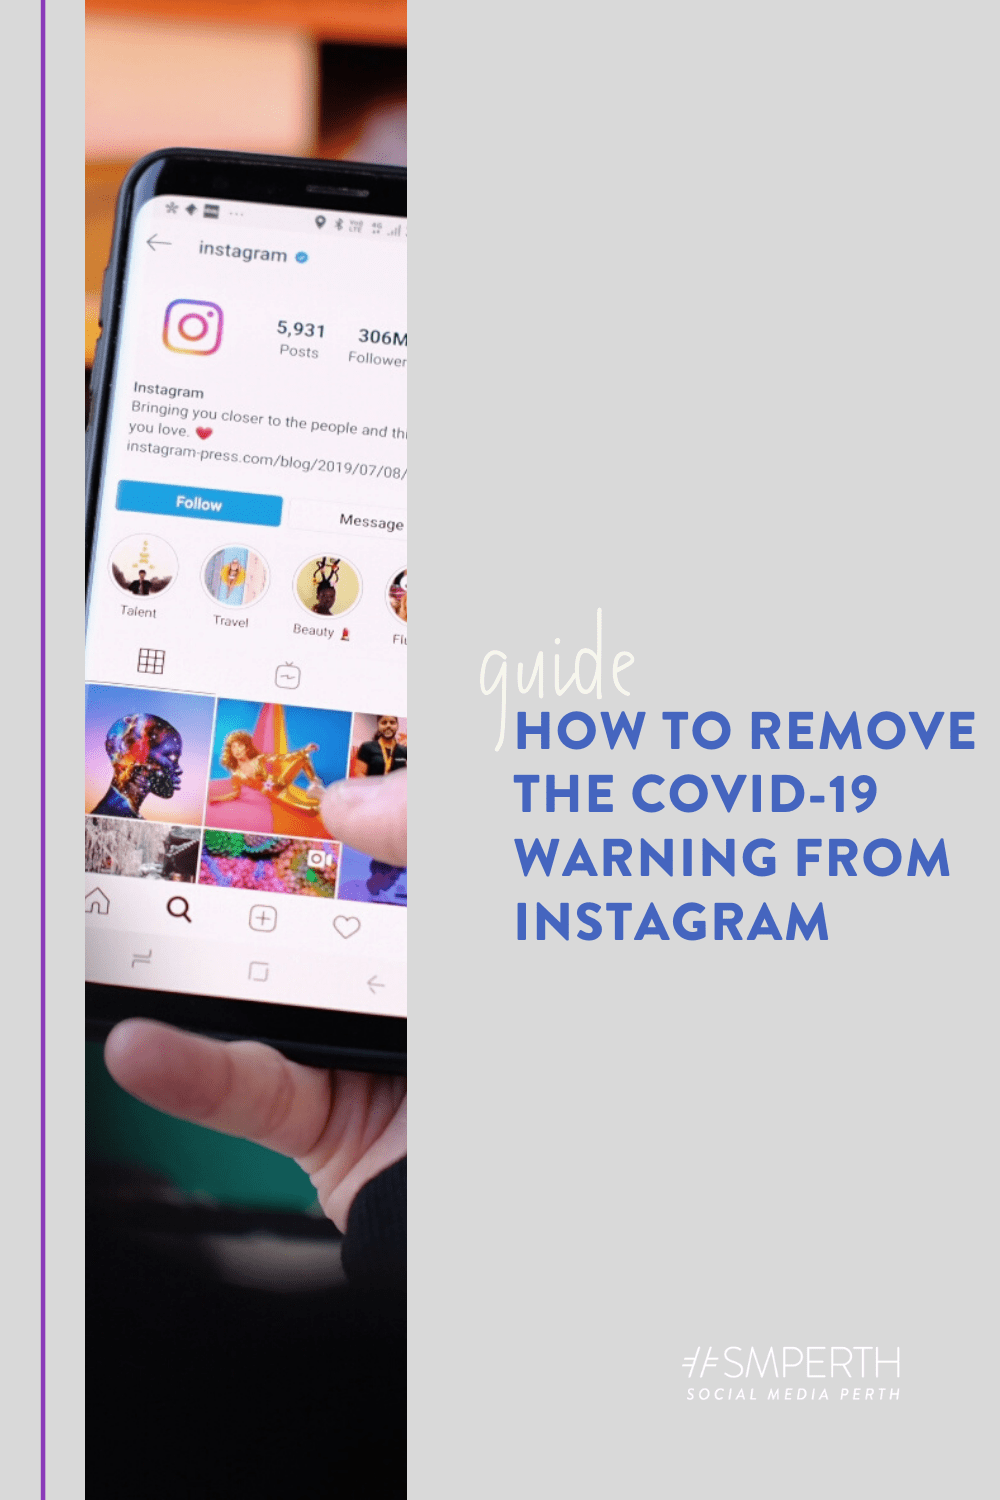 How to get rid of Covid-19 warning on Instagram